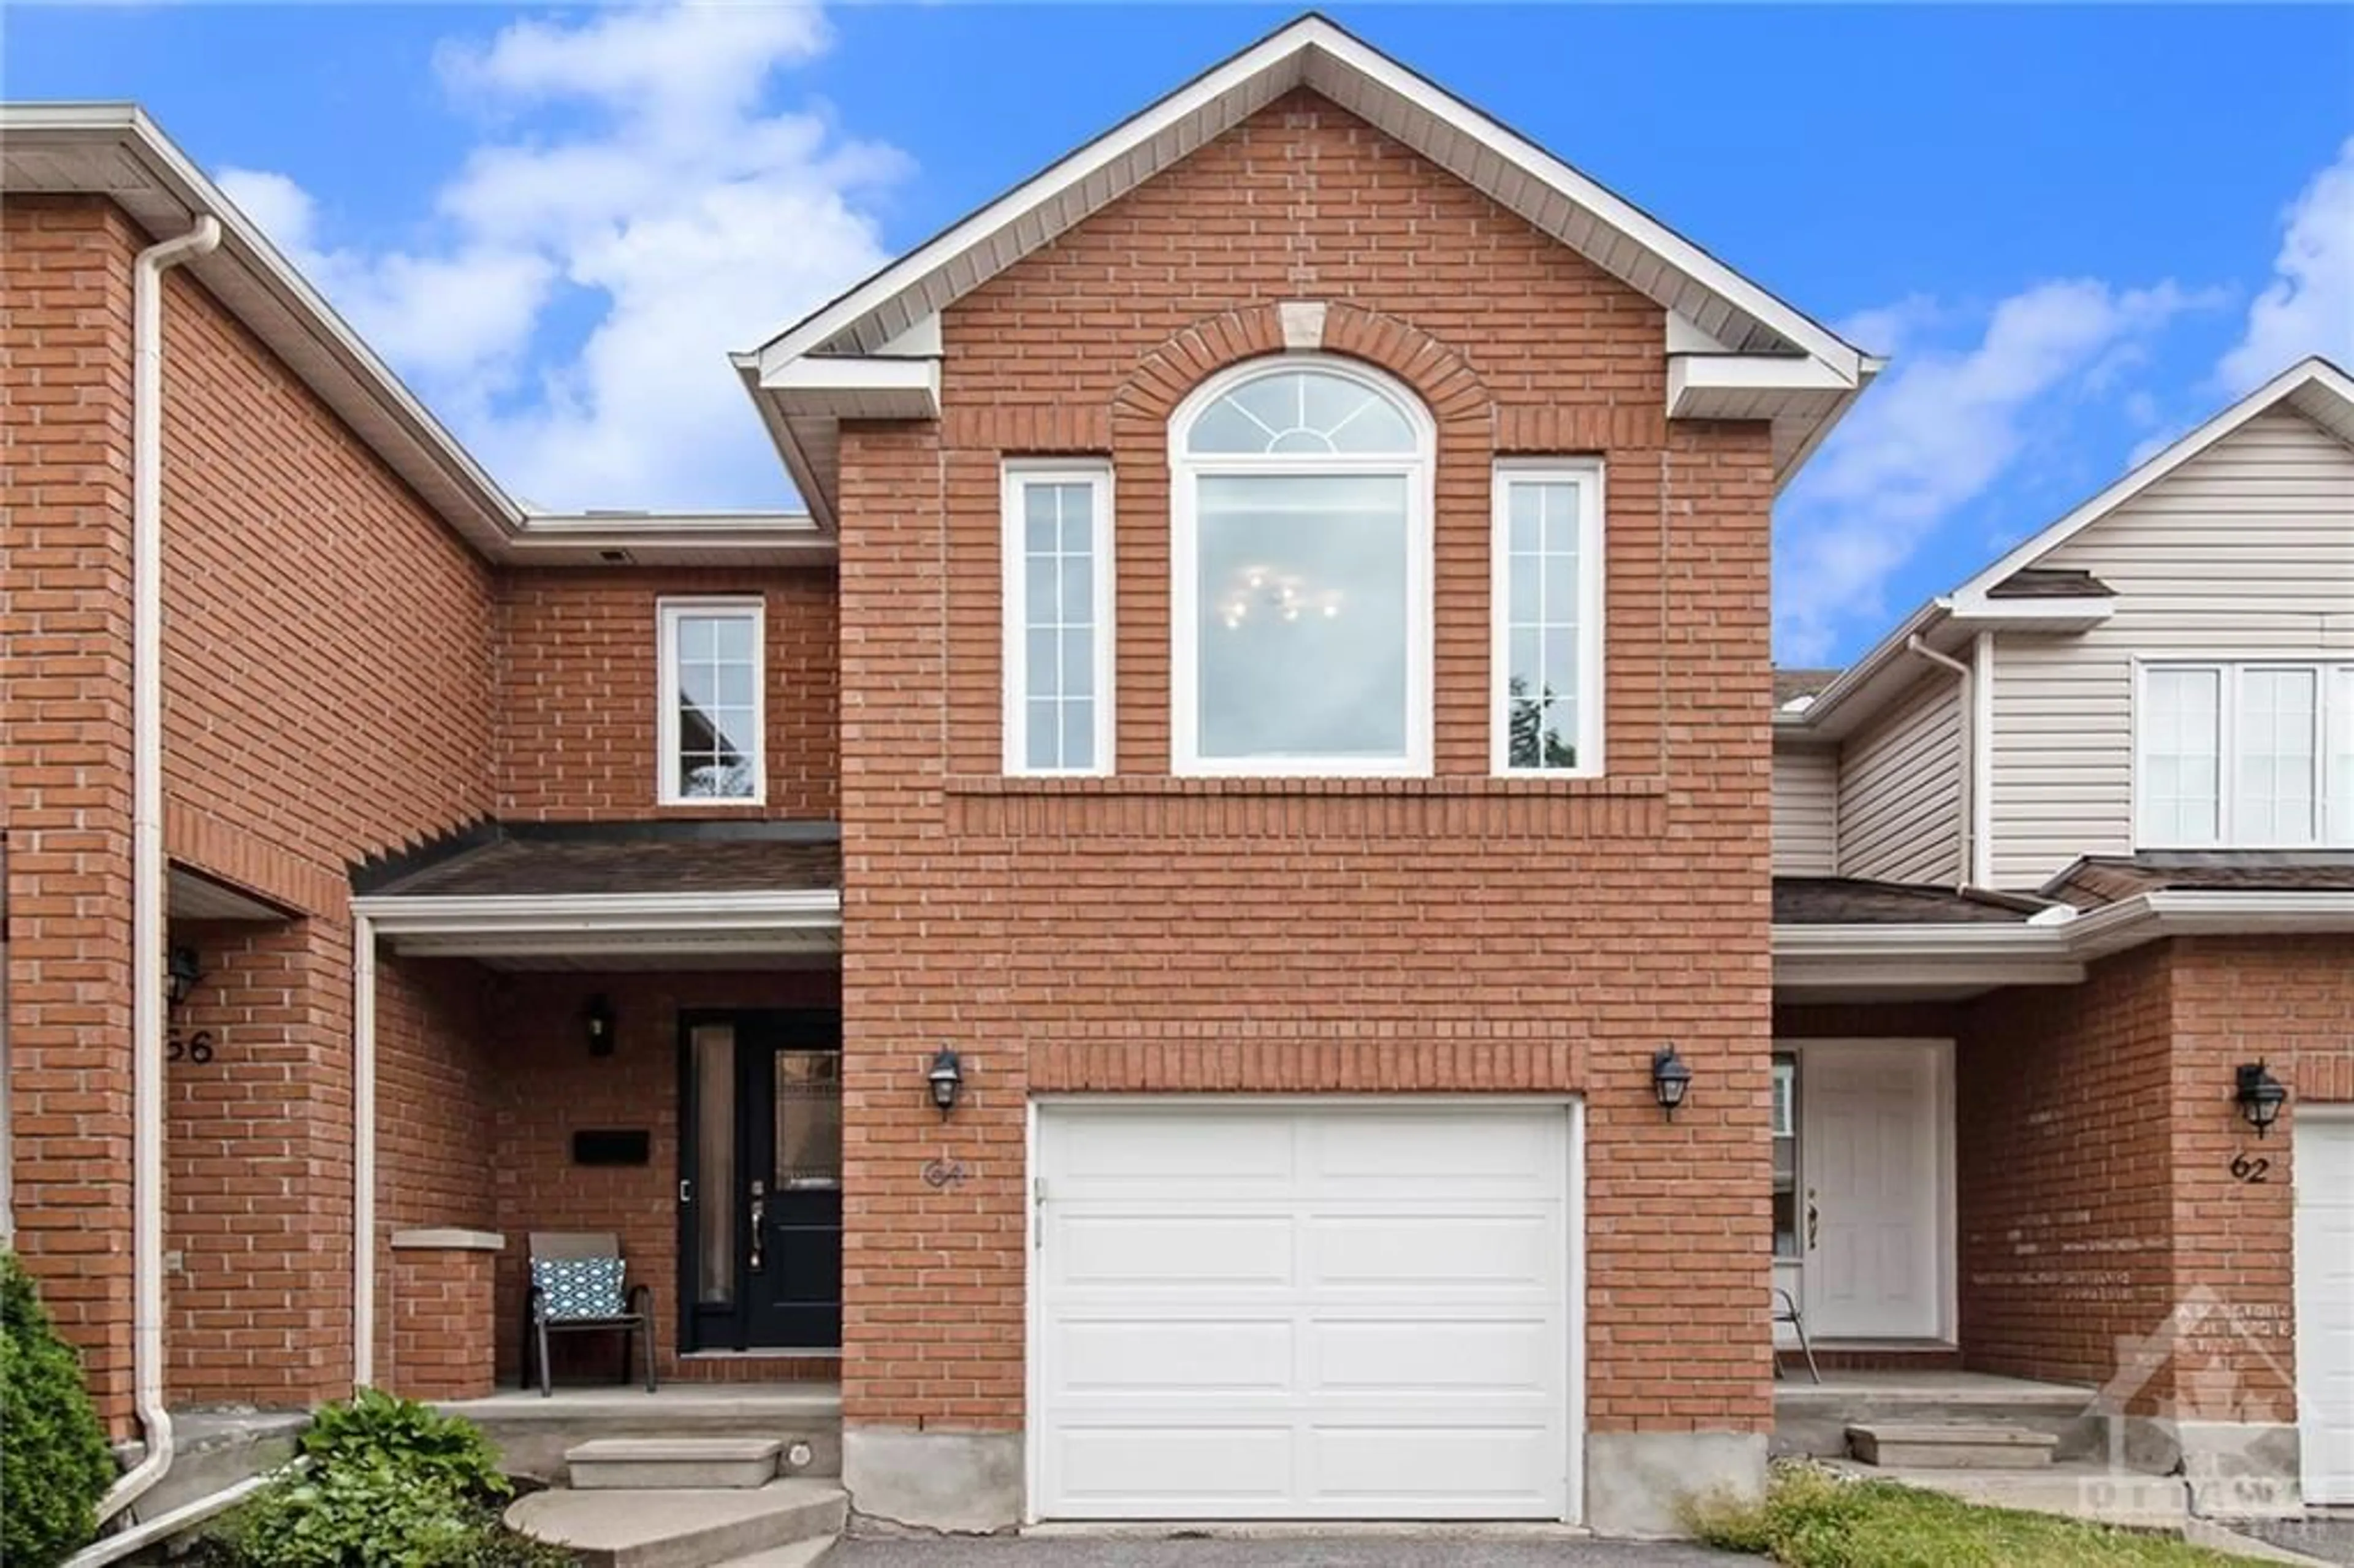 Home with brick exterior material for 64 ROSEANNE Lane, Ottawa Ontario K1B 1C2